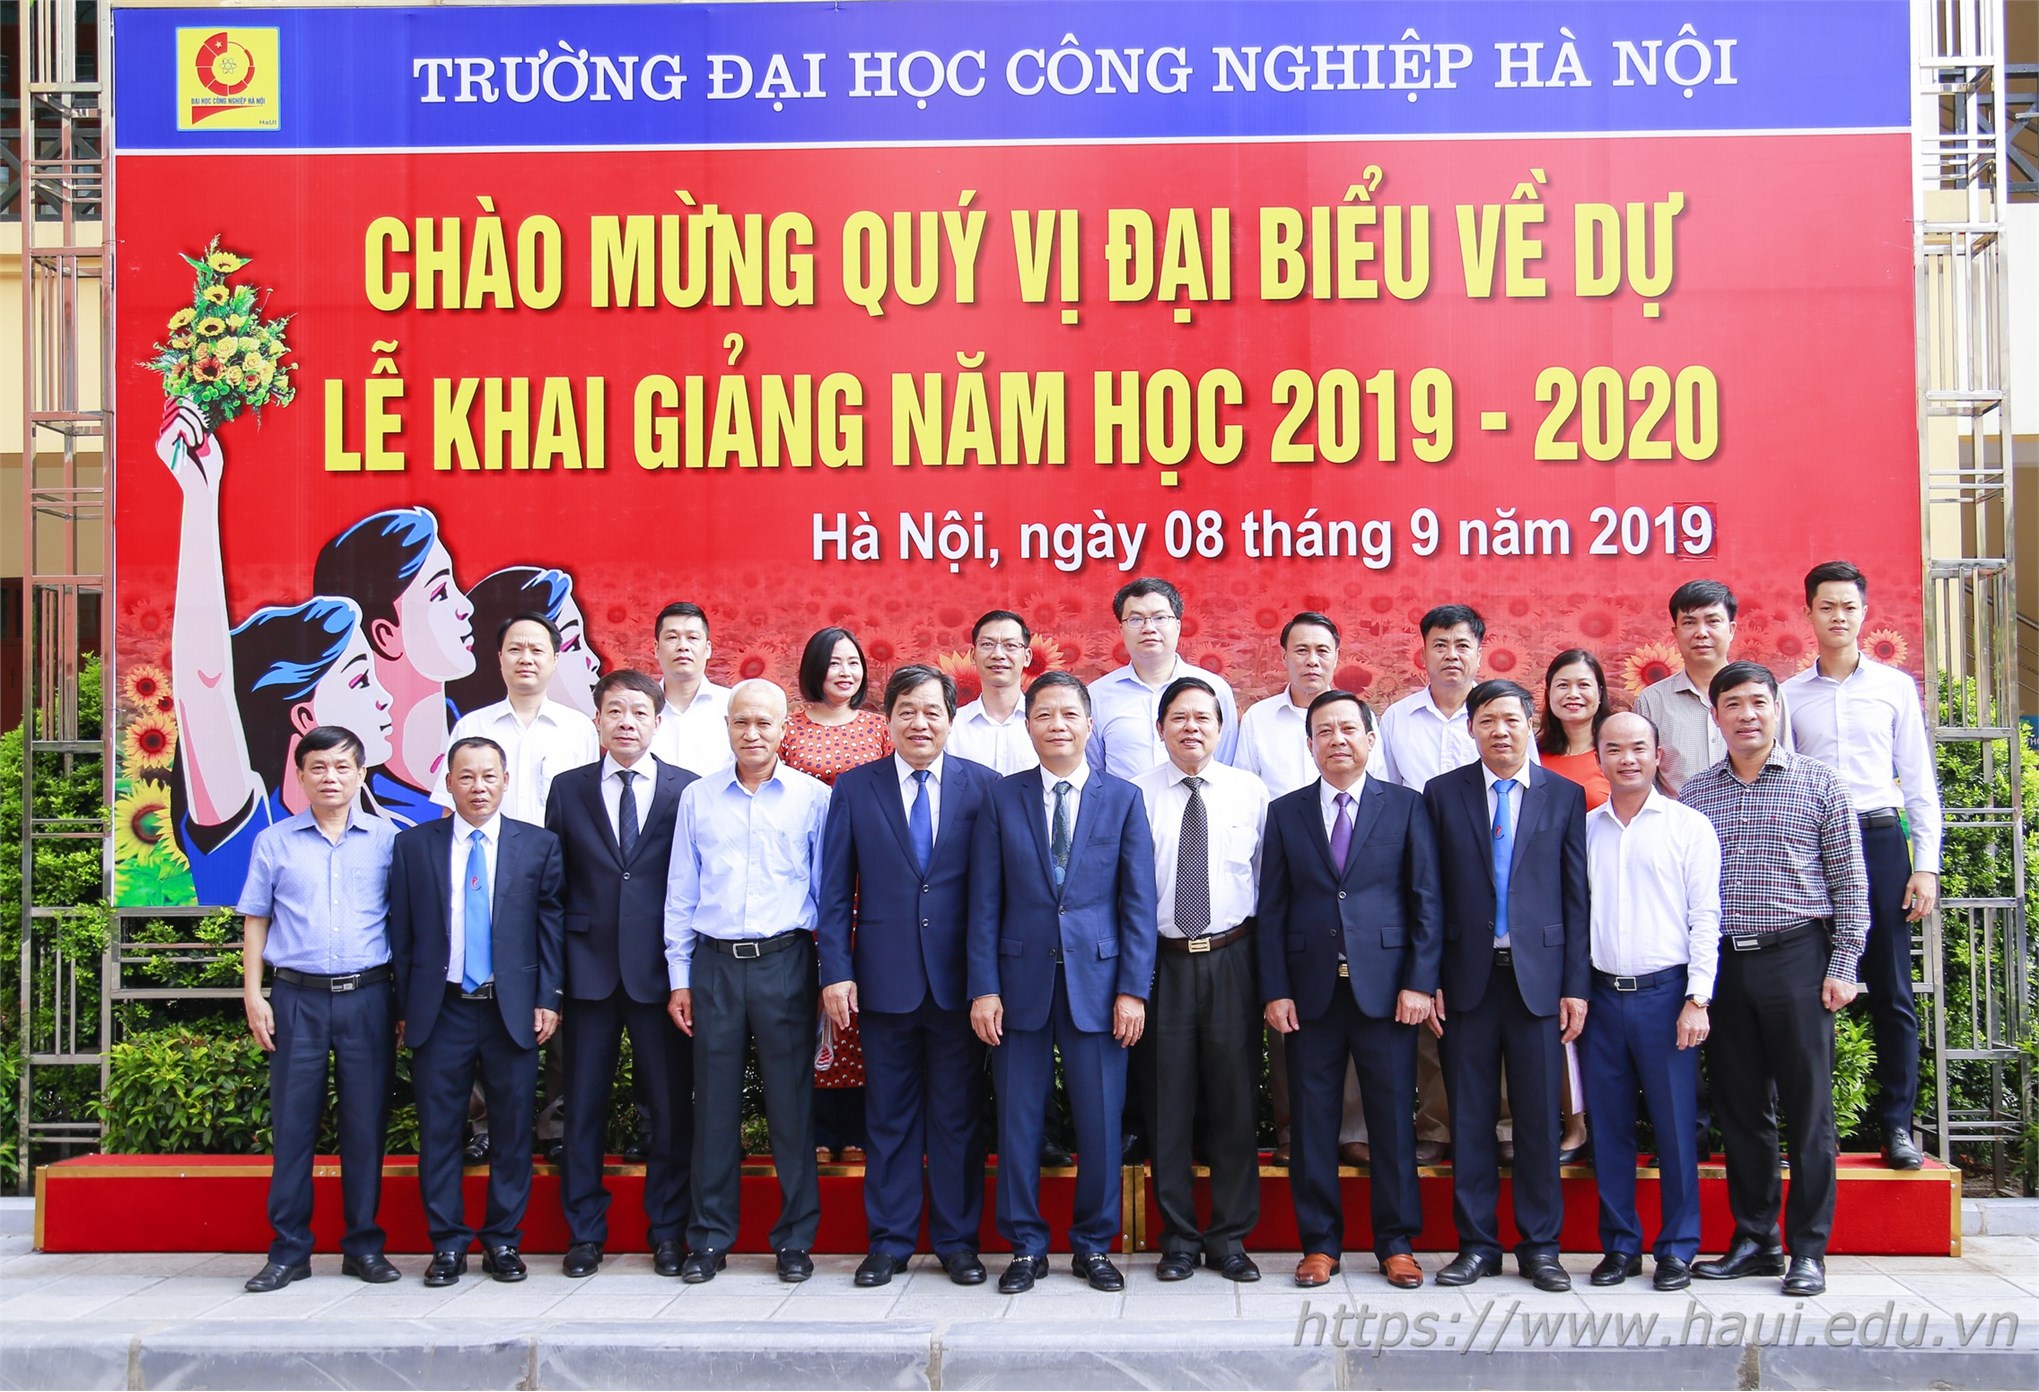 The Opening Ceremony of the New 2019 - 2020 Academic Year